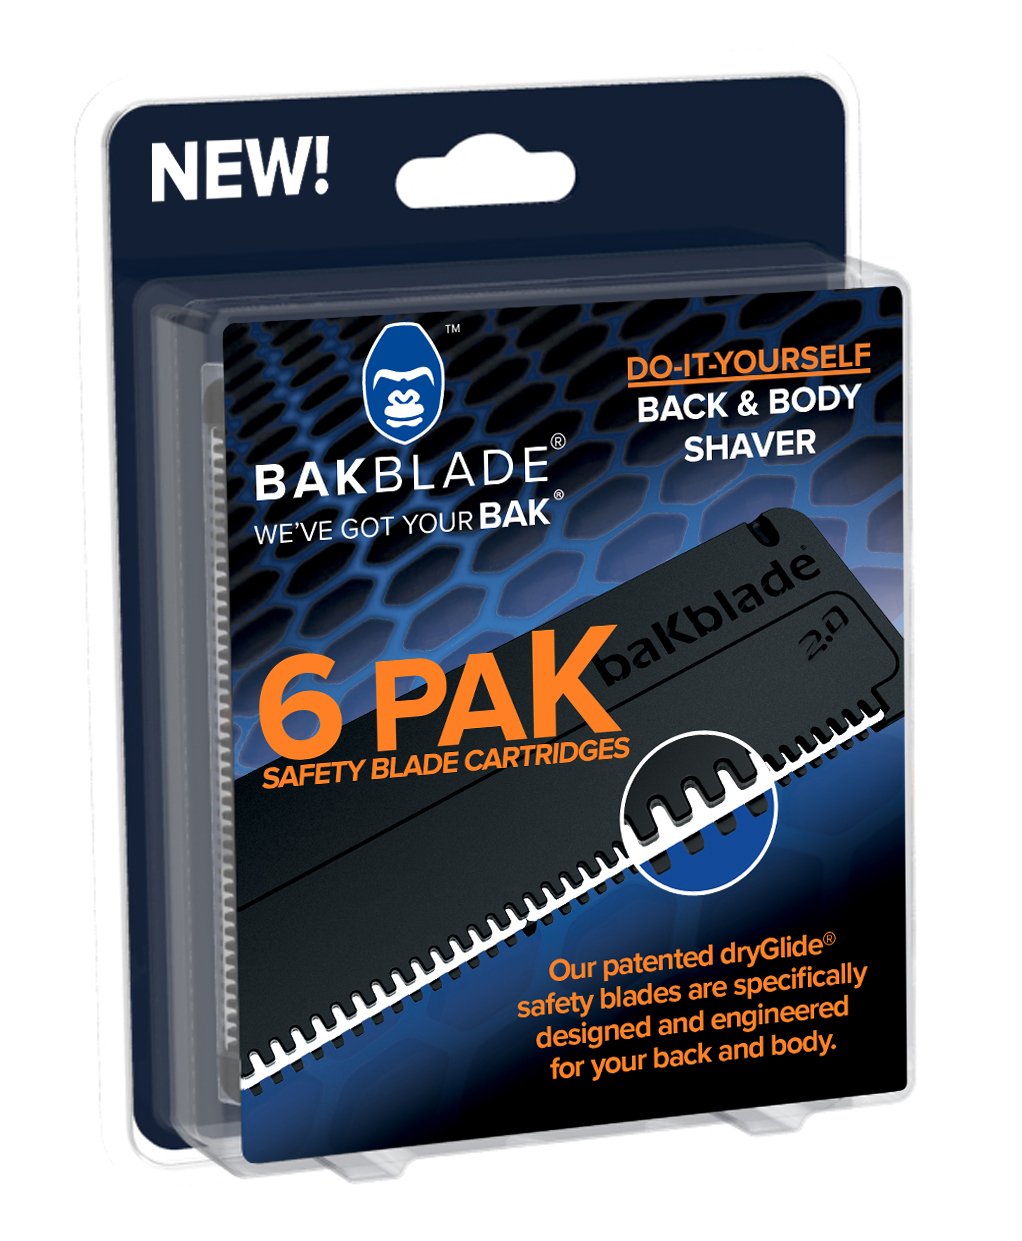 [Australia] - BAKblade 2.0 Replacement Blades, Set of 6 Safety Blades, 9 cm Wide, DryGlide, for Soft and Safe Shaving of Back and Body 